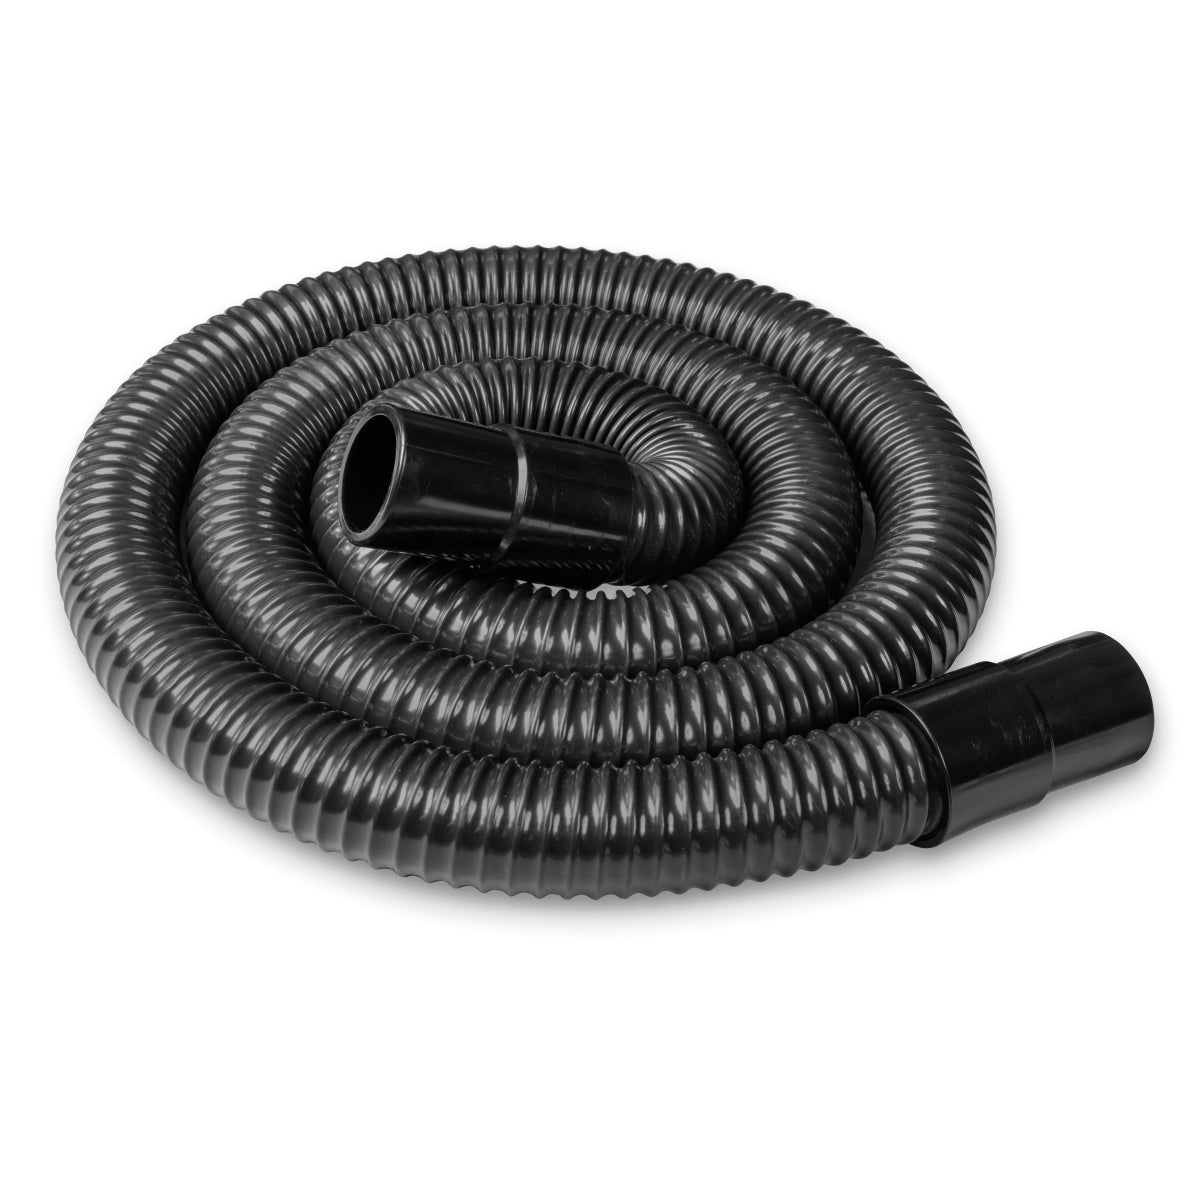 Miller Filtair 130 (17-ft) Collection Hose (300896)